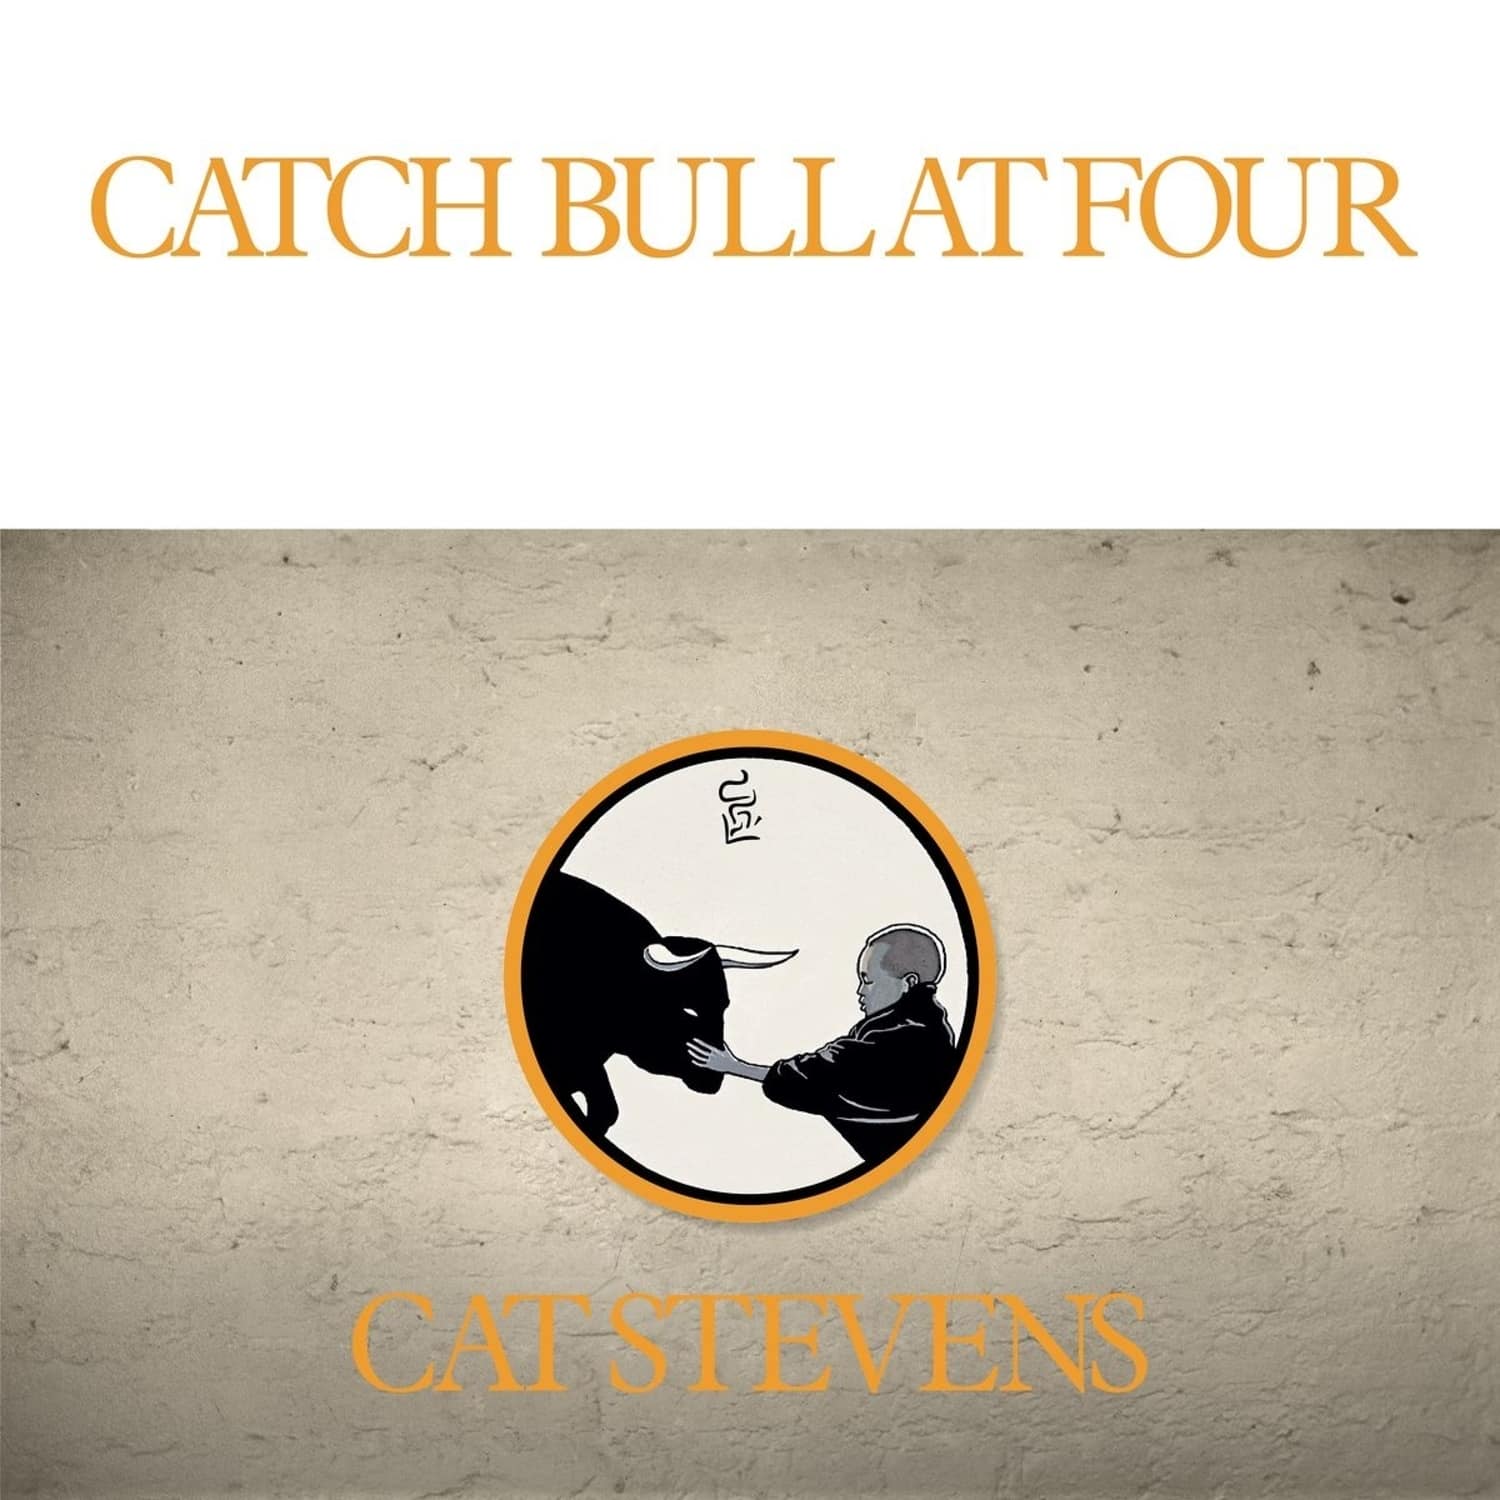  Cat Stevens - CATCH BULL AT FOUR 50TH ANNIVERSARY REMASTER 